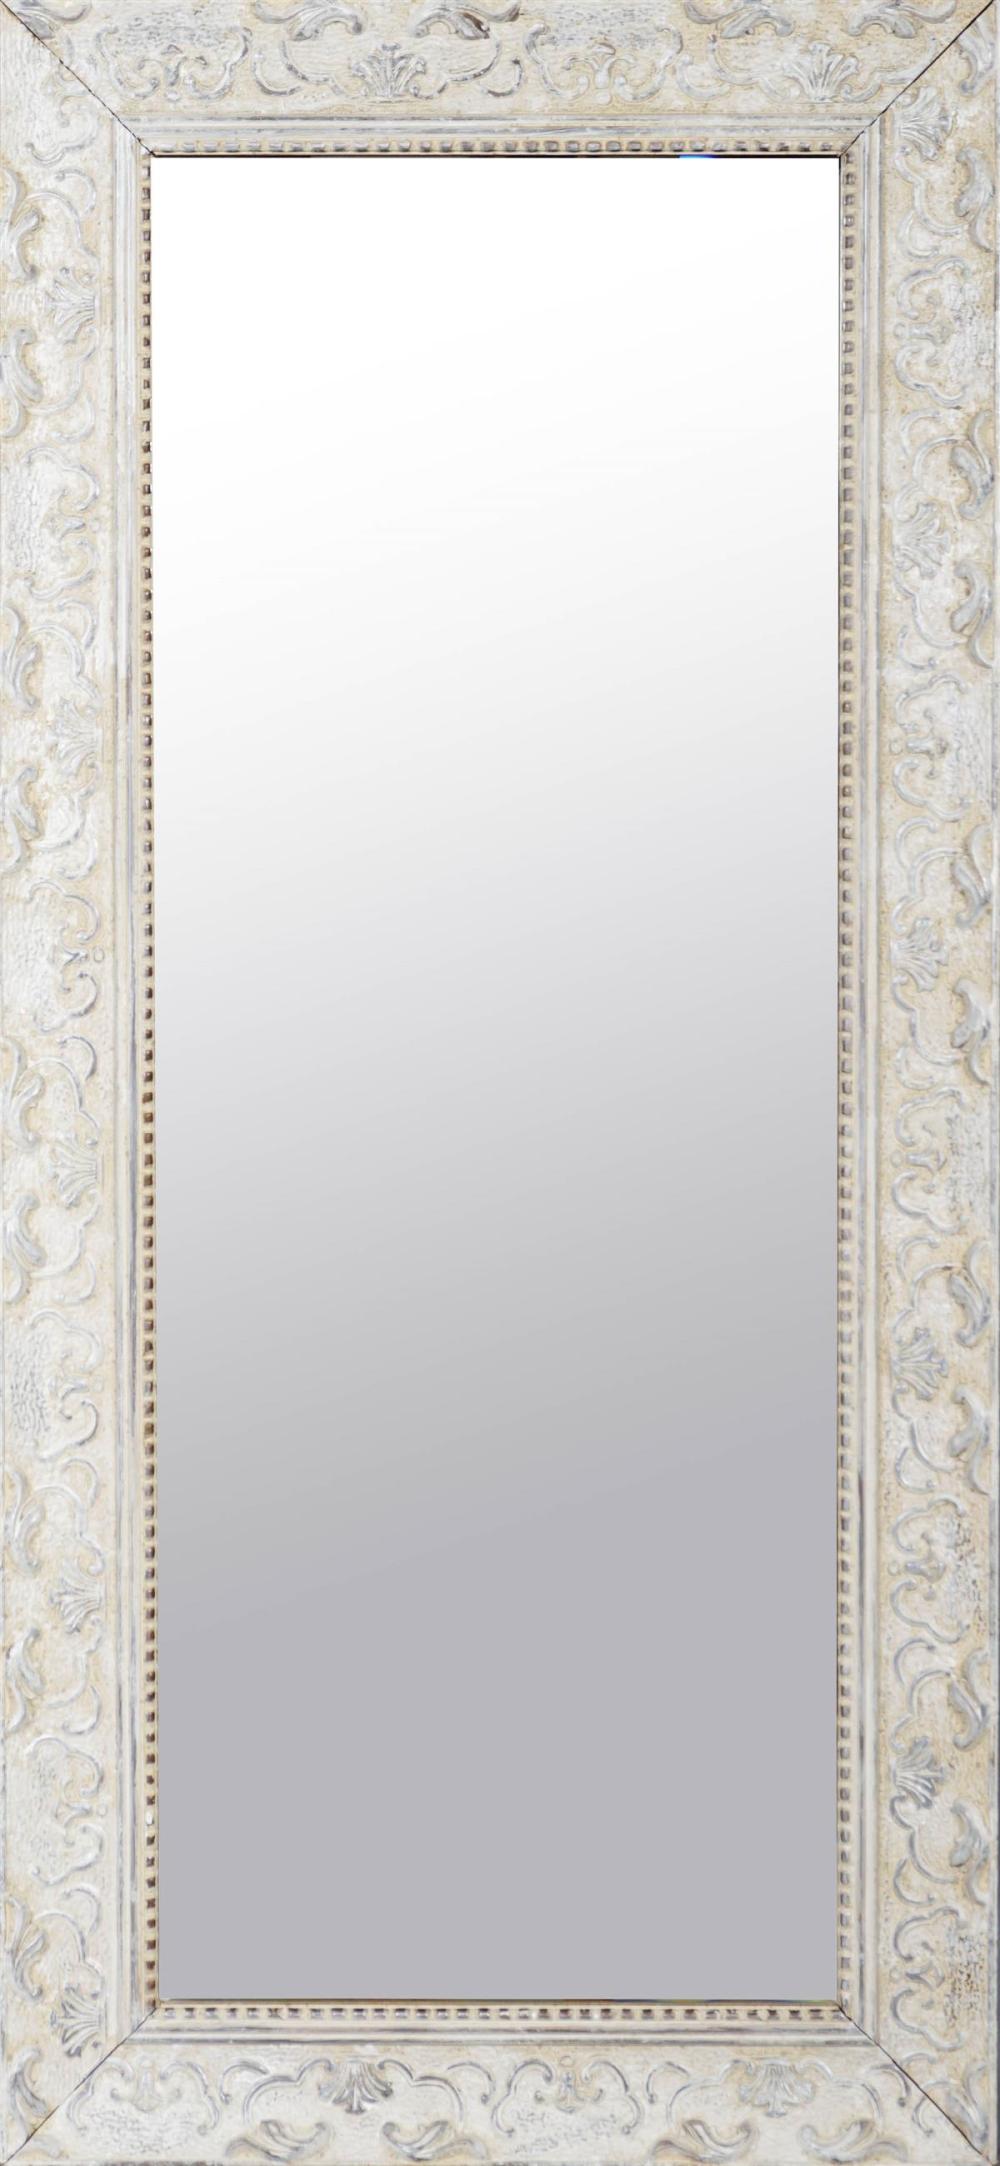 WHITE MIRROR WITH SHELL BORDER 33c173